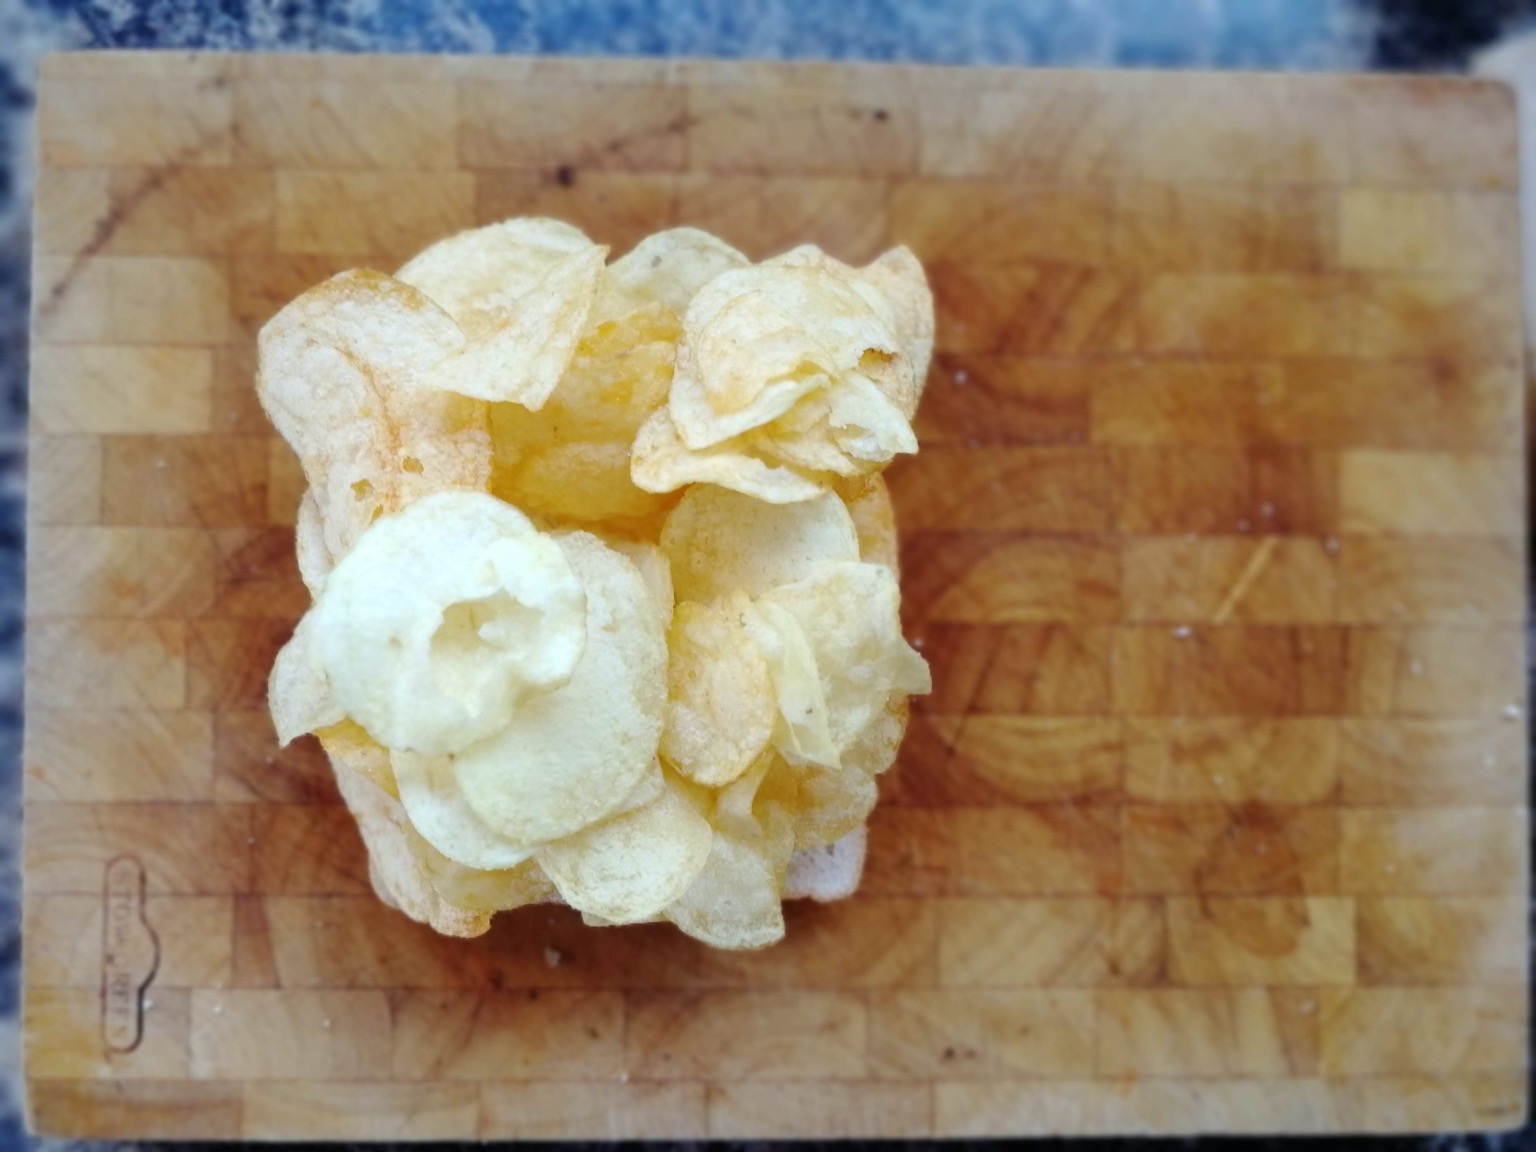 Many crisps on white bread on a chopping board